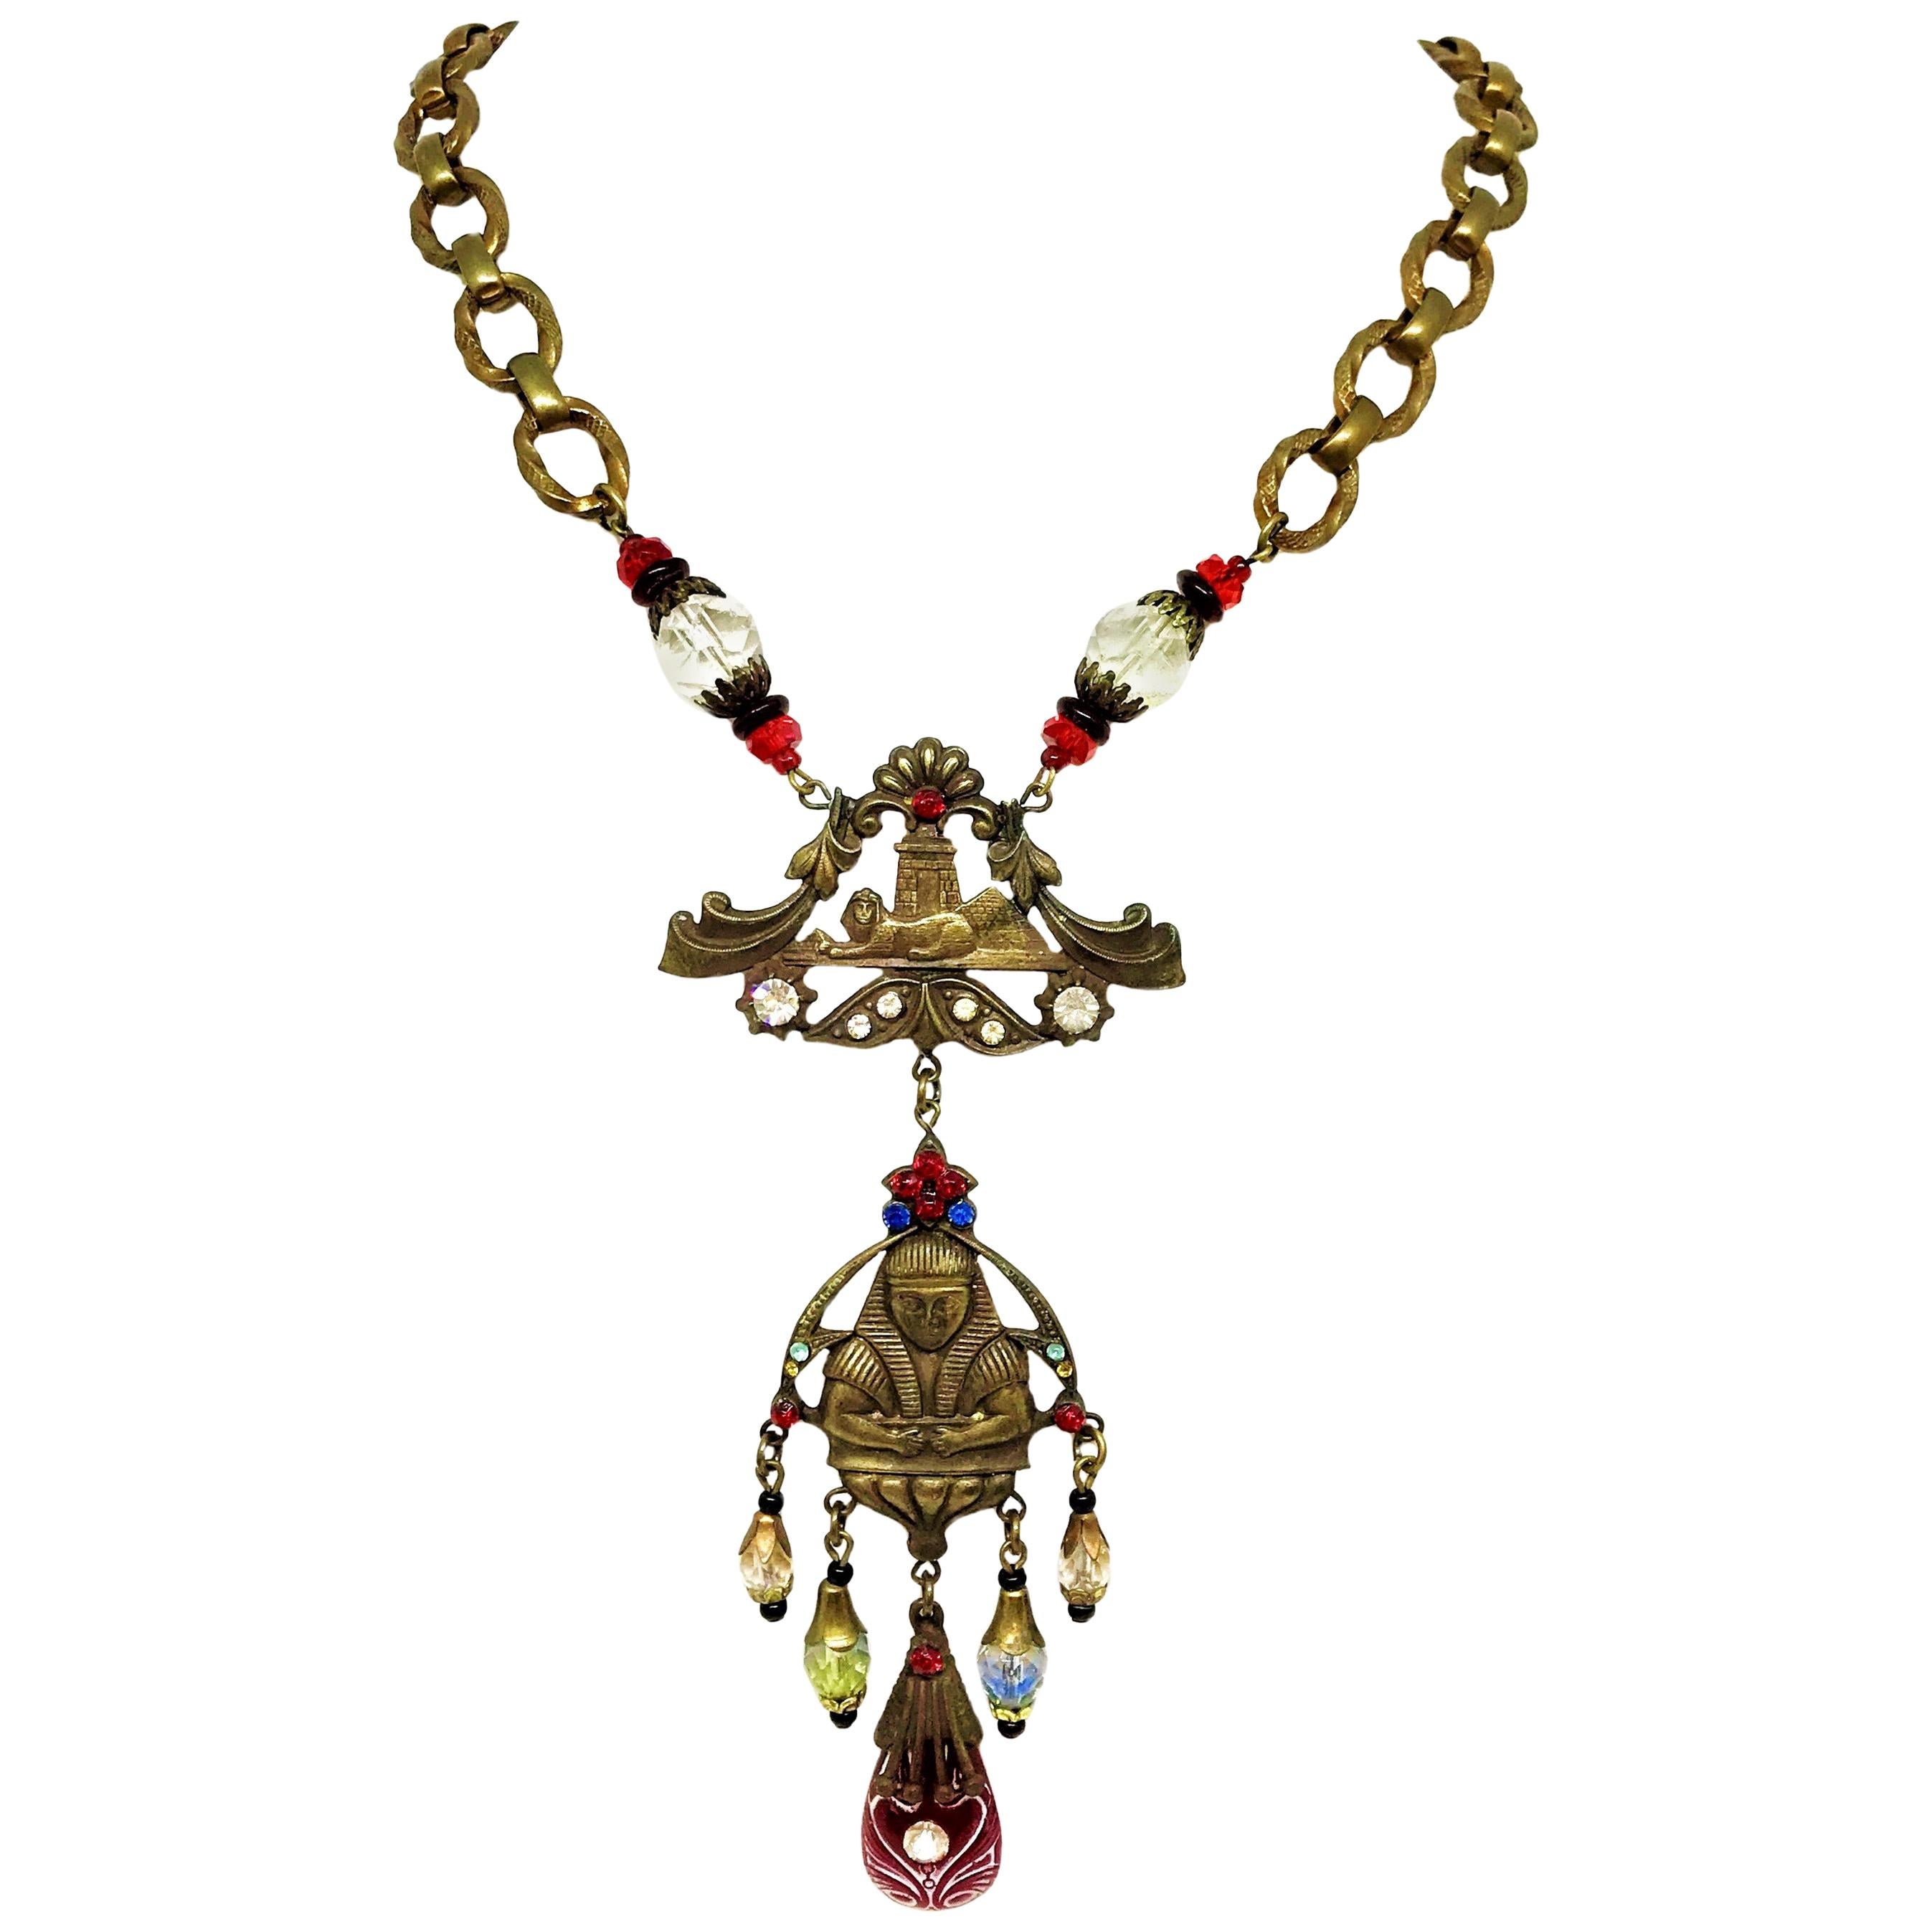 Circa 1920s to 1930s Czechoslovakian Egyptian Revival Necklace For Sale